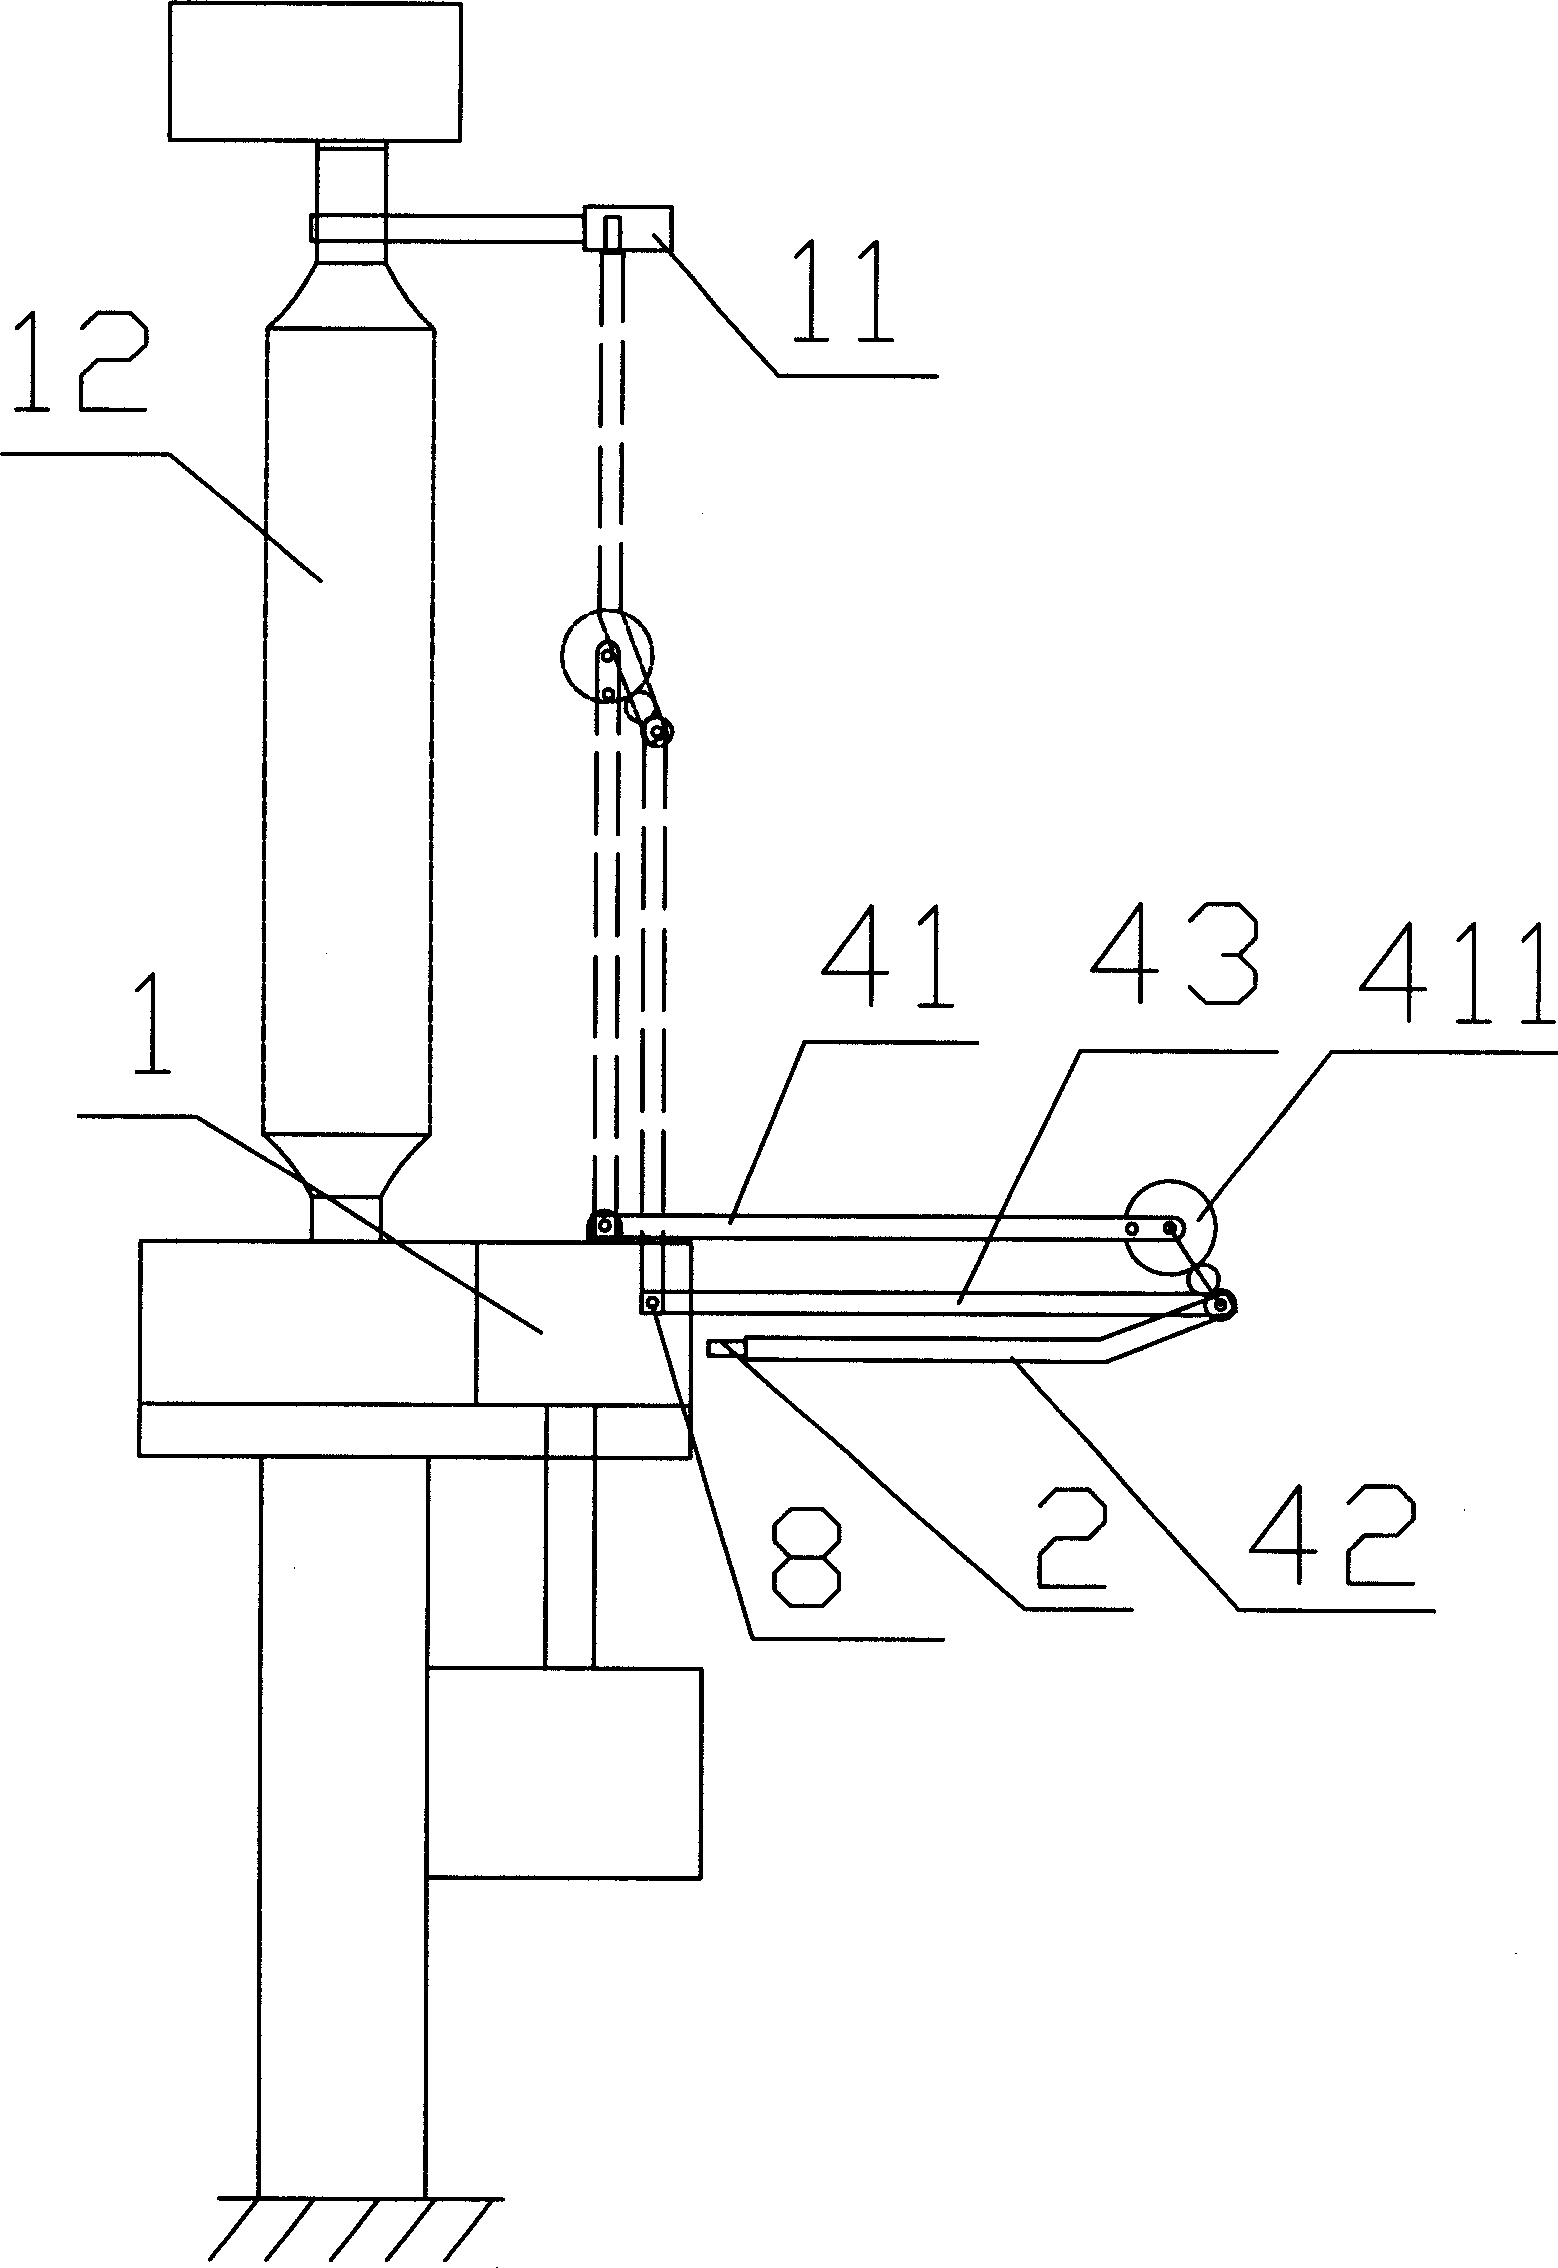 Fast involute grounding switch with ultrahigh-voltage